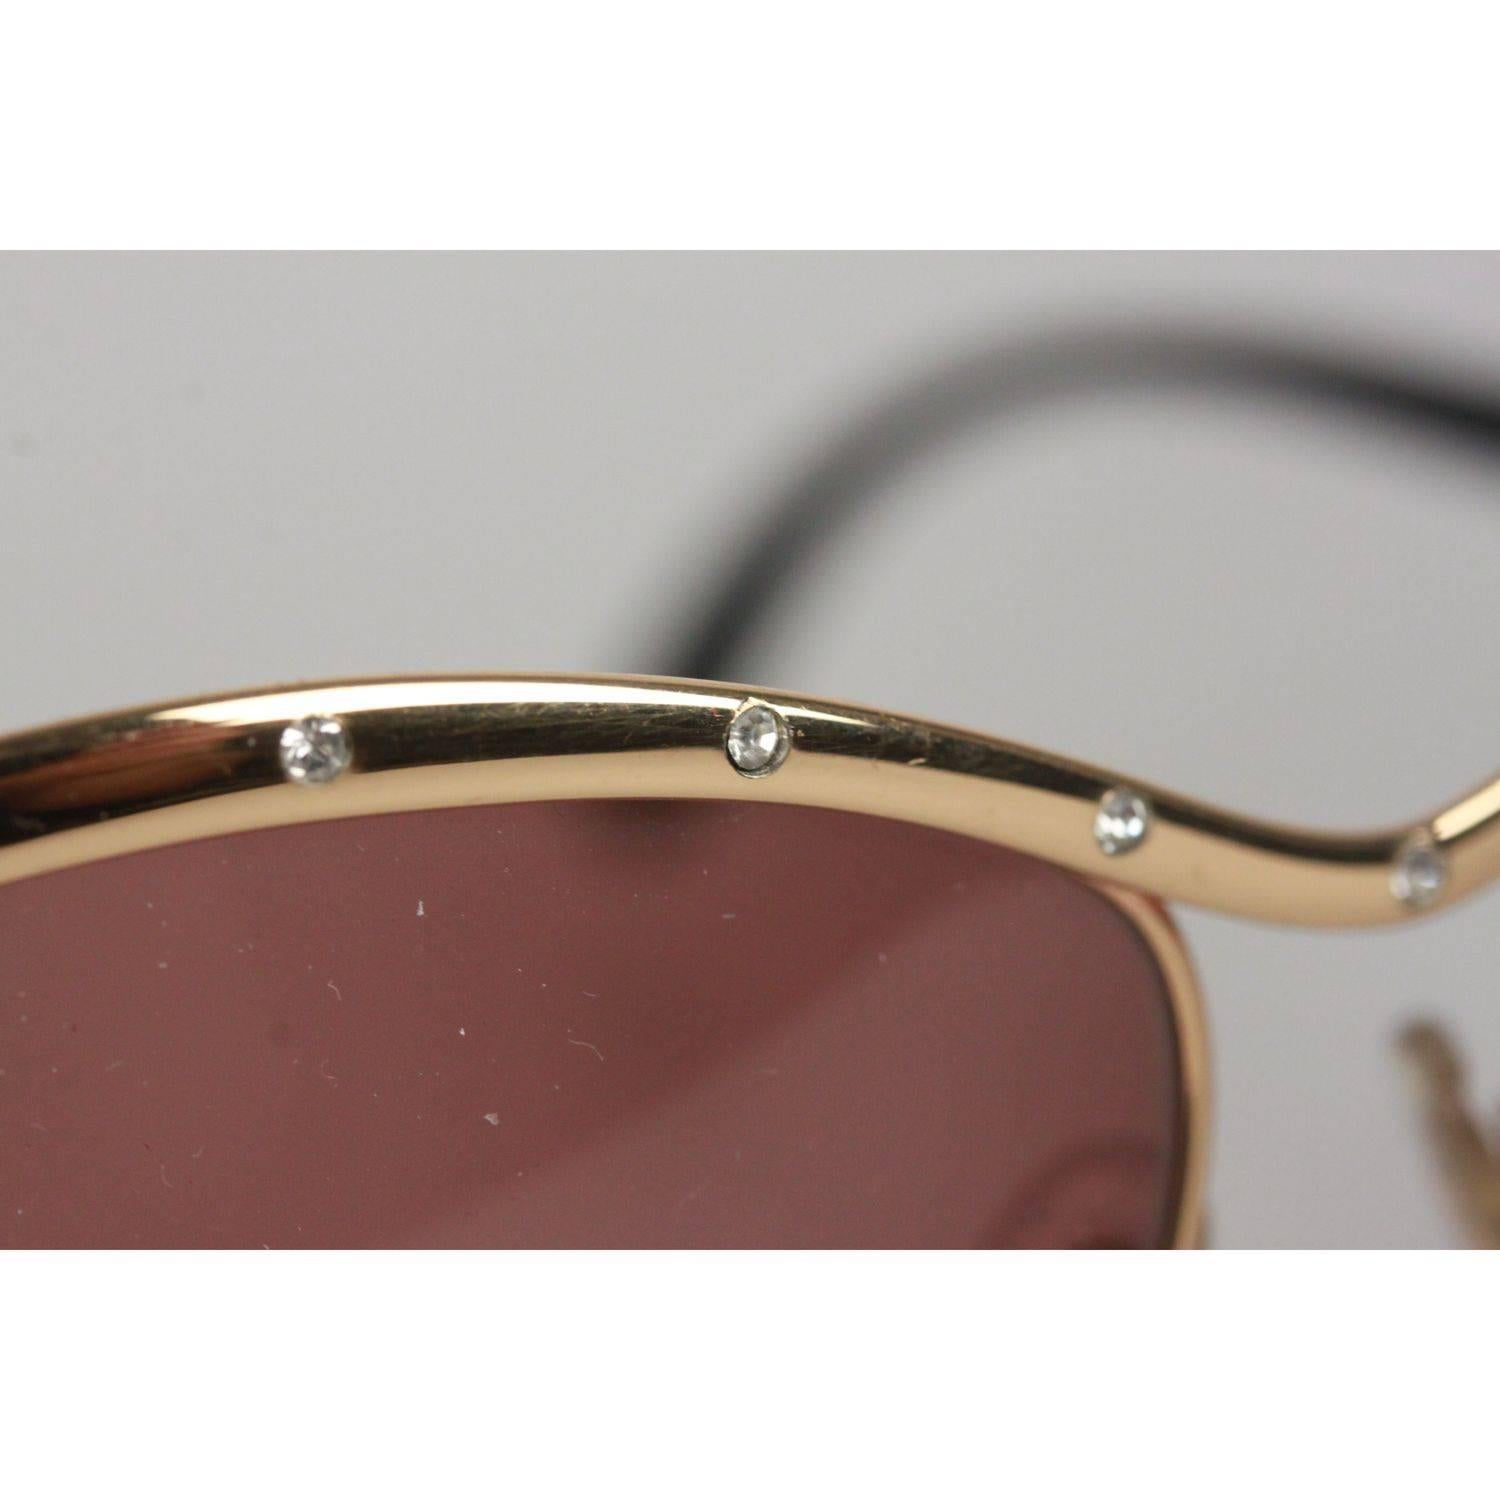 TED LAPIDUS Vintage Gold OVERSIZED Sunglasses with Rhinestones TL 3301 NOS 1